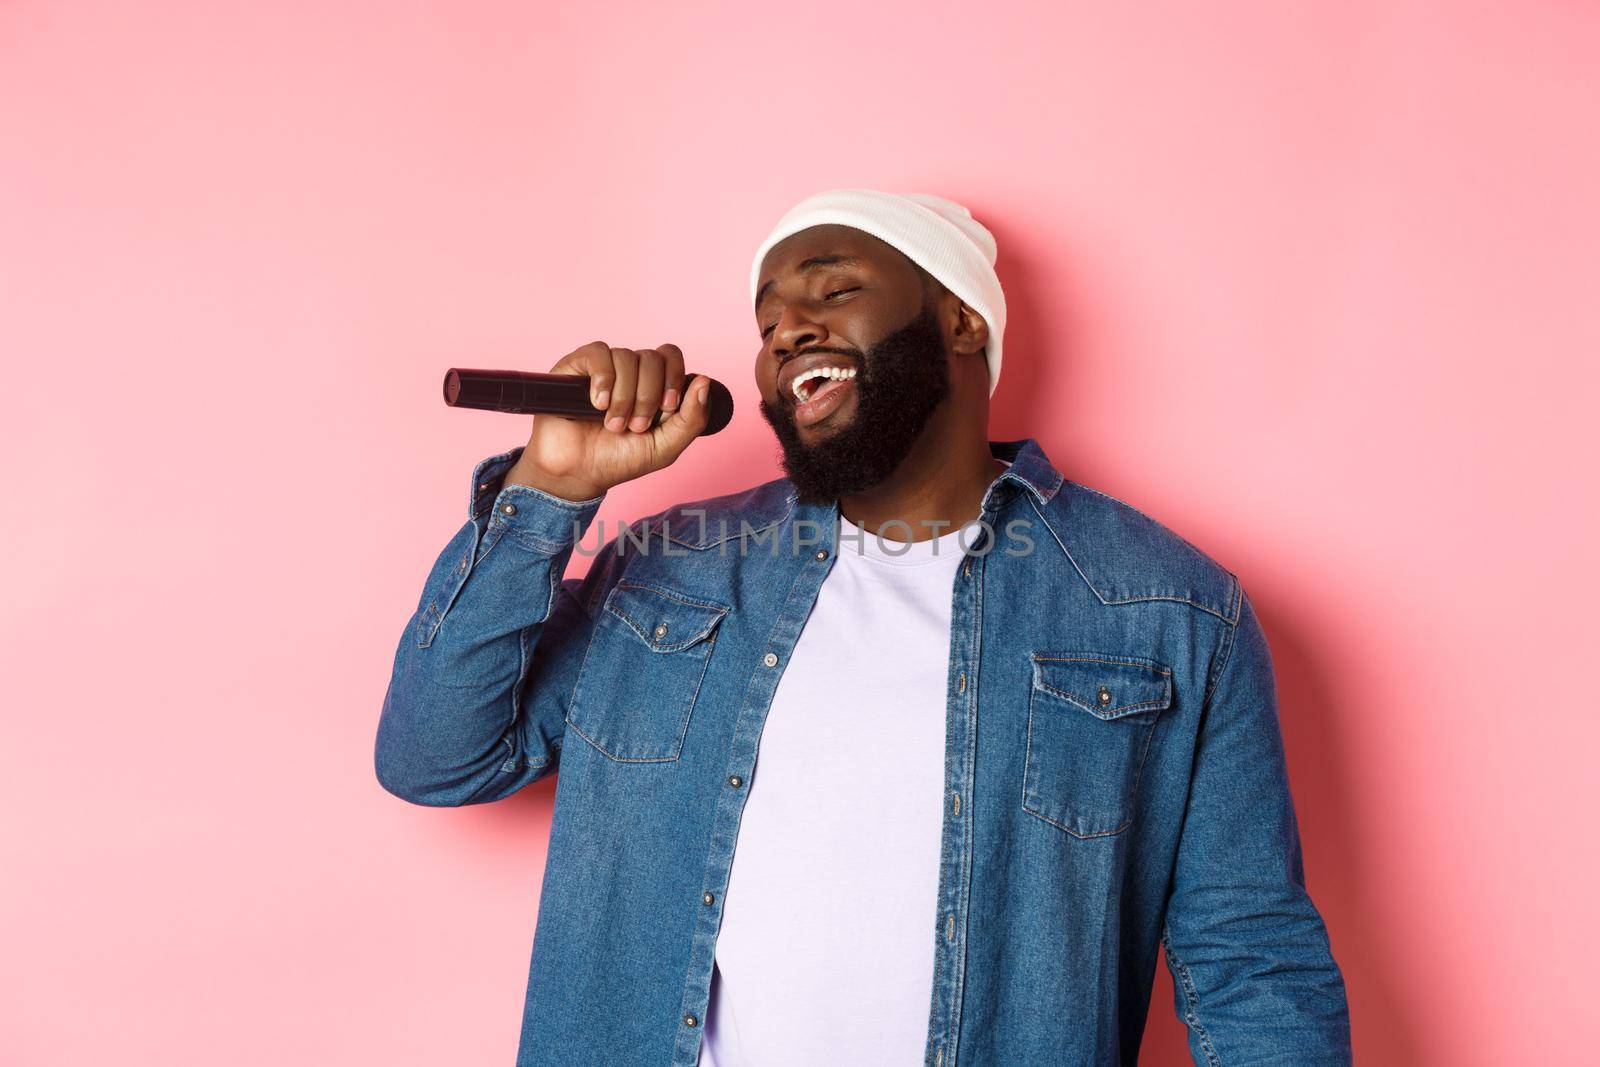 Handsome Black man in beanie and denim shirt singing karaoke, holding microphone, standing over pink background by Benzoix